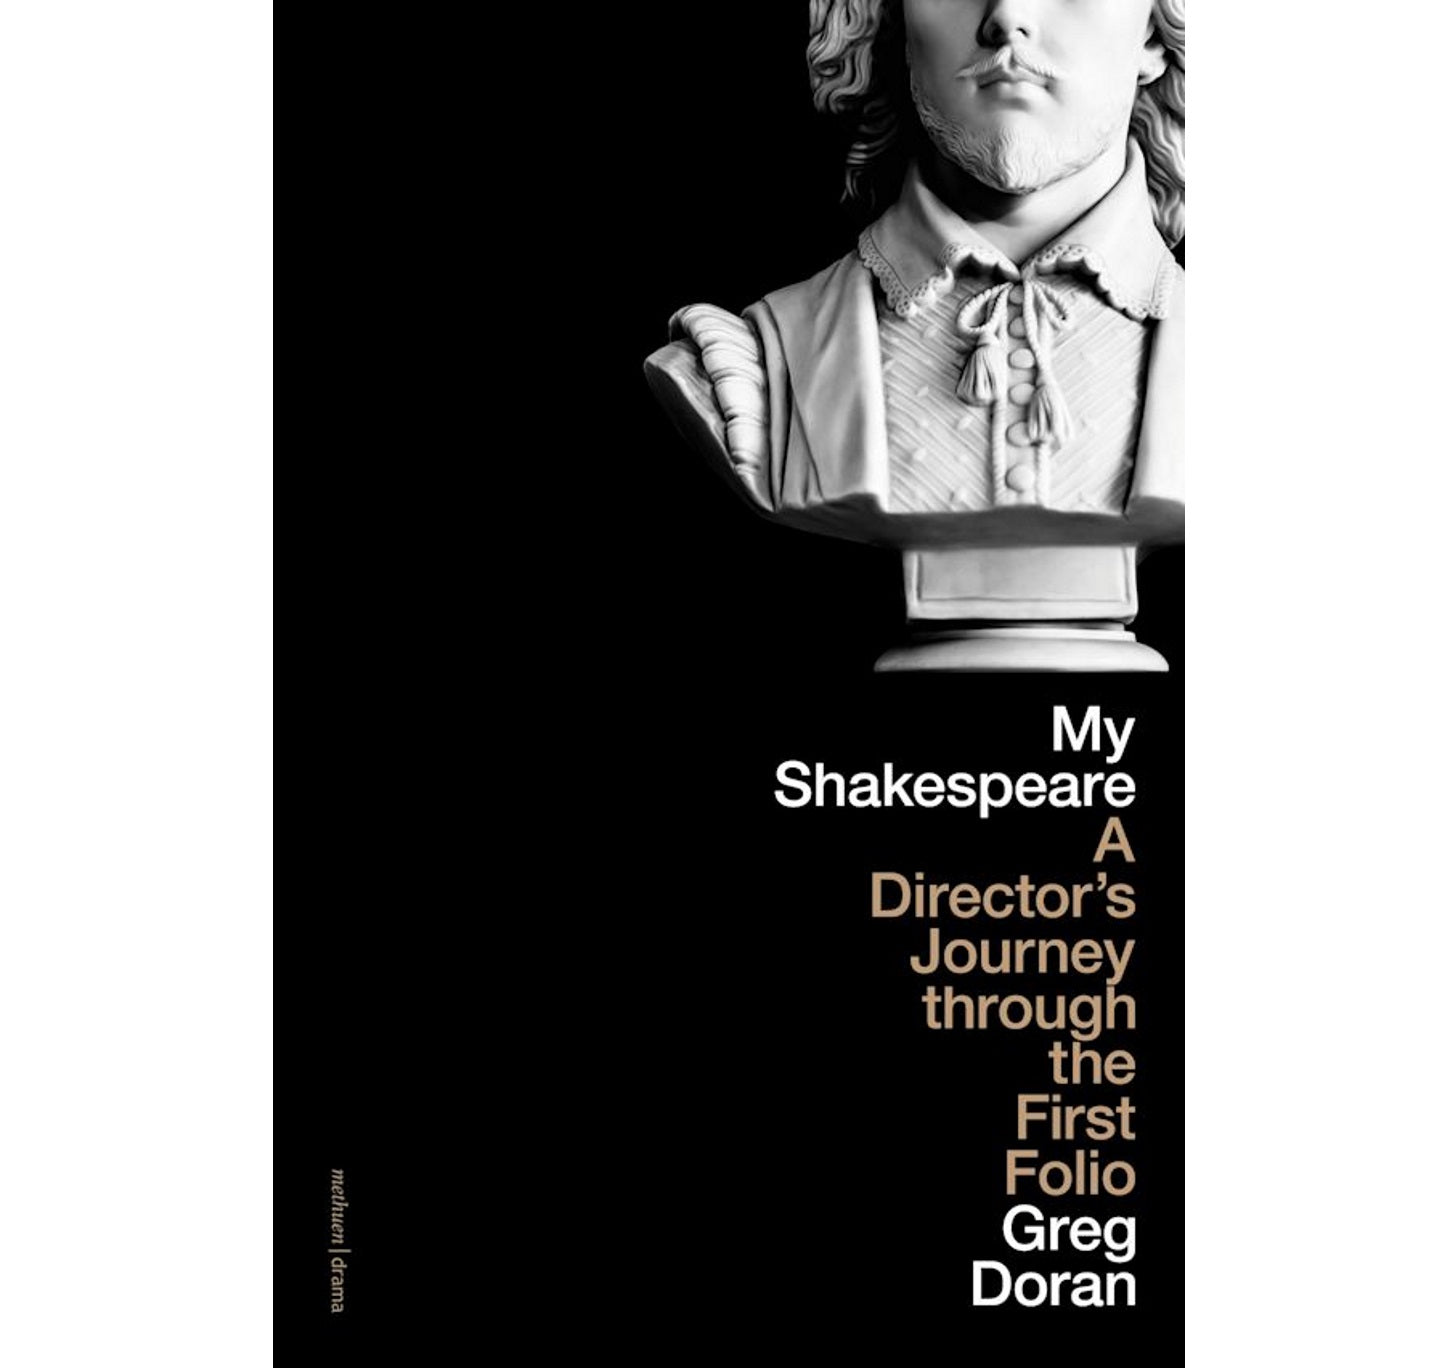 My Shakespeare - A Director’s Journey through the First Folio HB